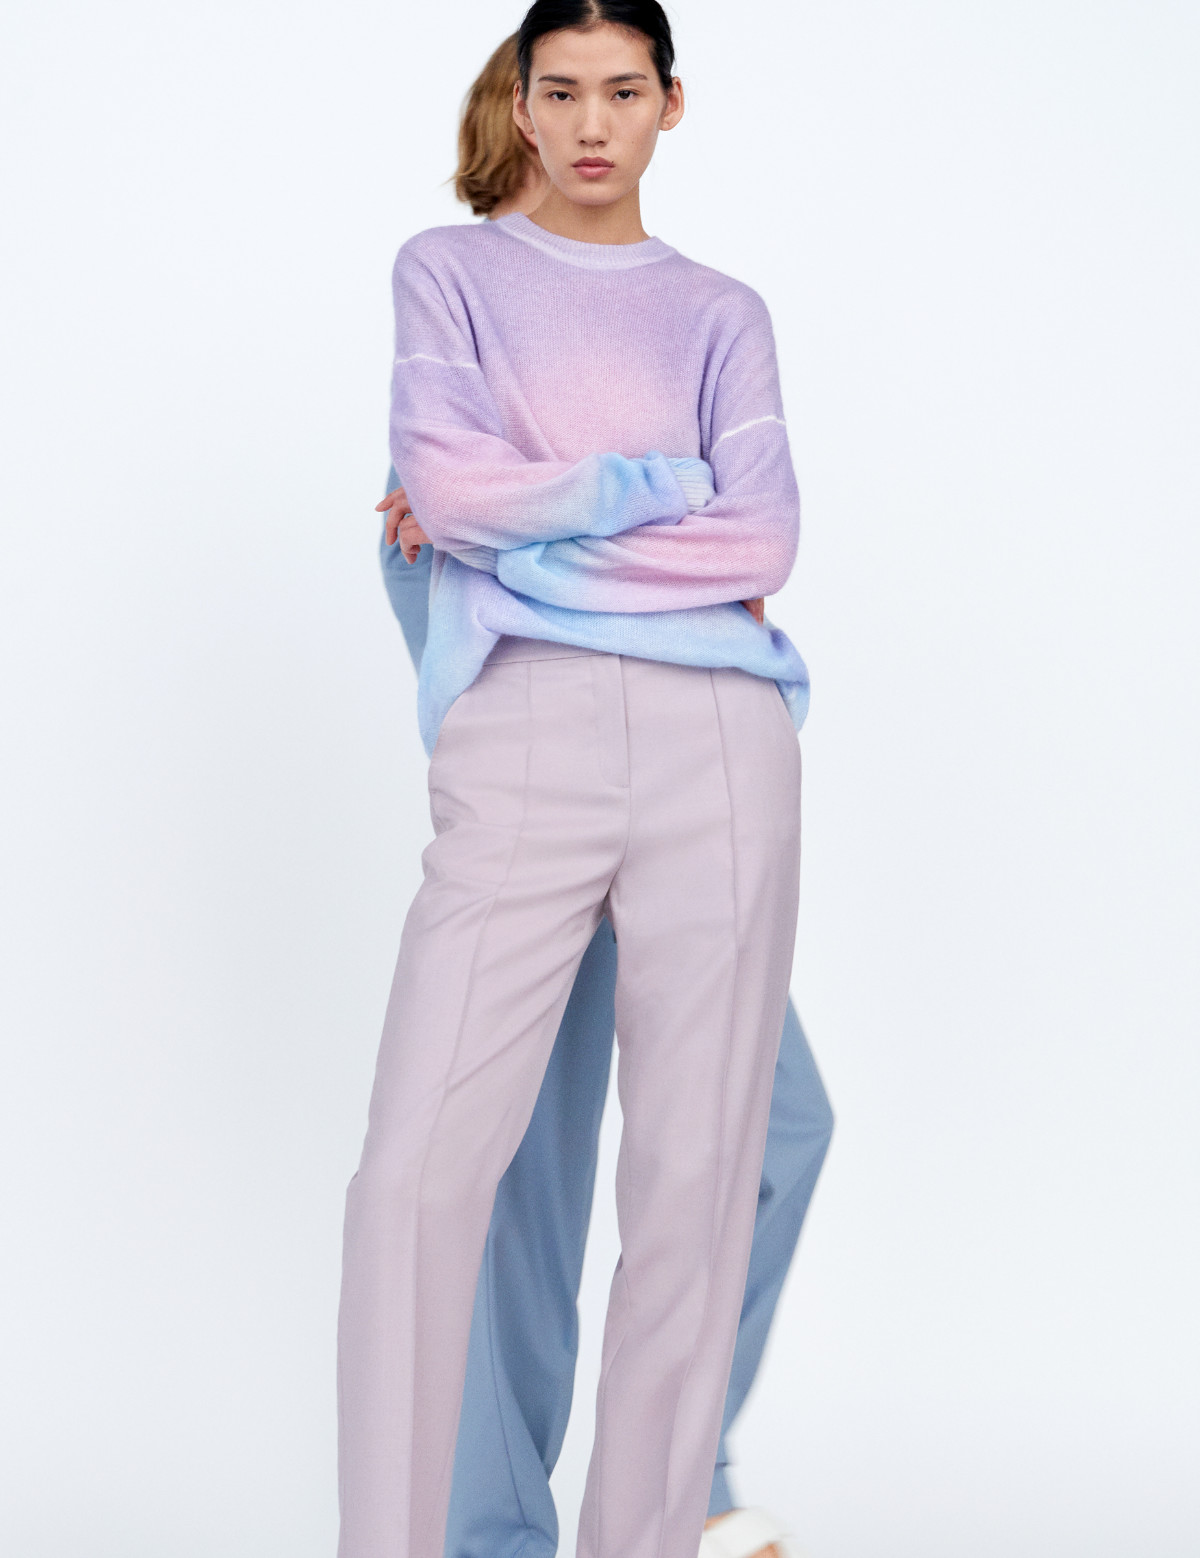 ICICLE Presents Its Spring Summer 2022 Collection